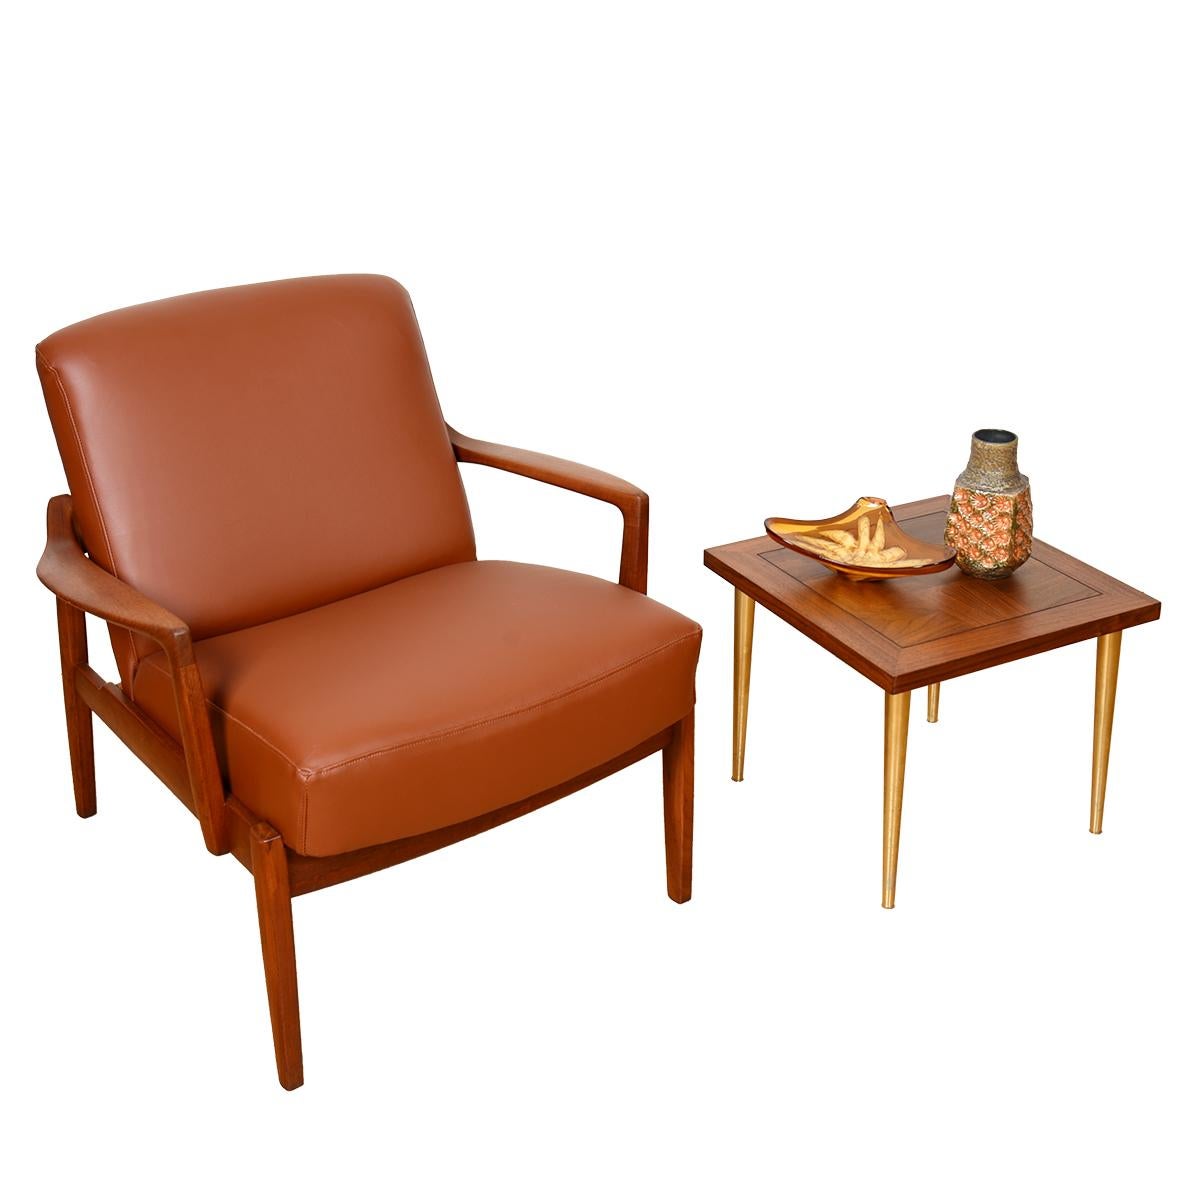 Danish Teak Frame + Leather Cushions Lounge Chair by Tove & Edvard Kindt-Larsen For Sale 1